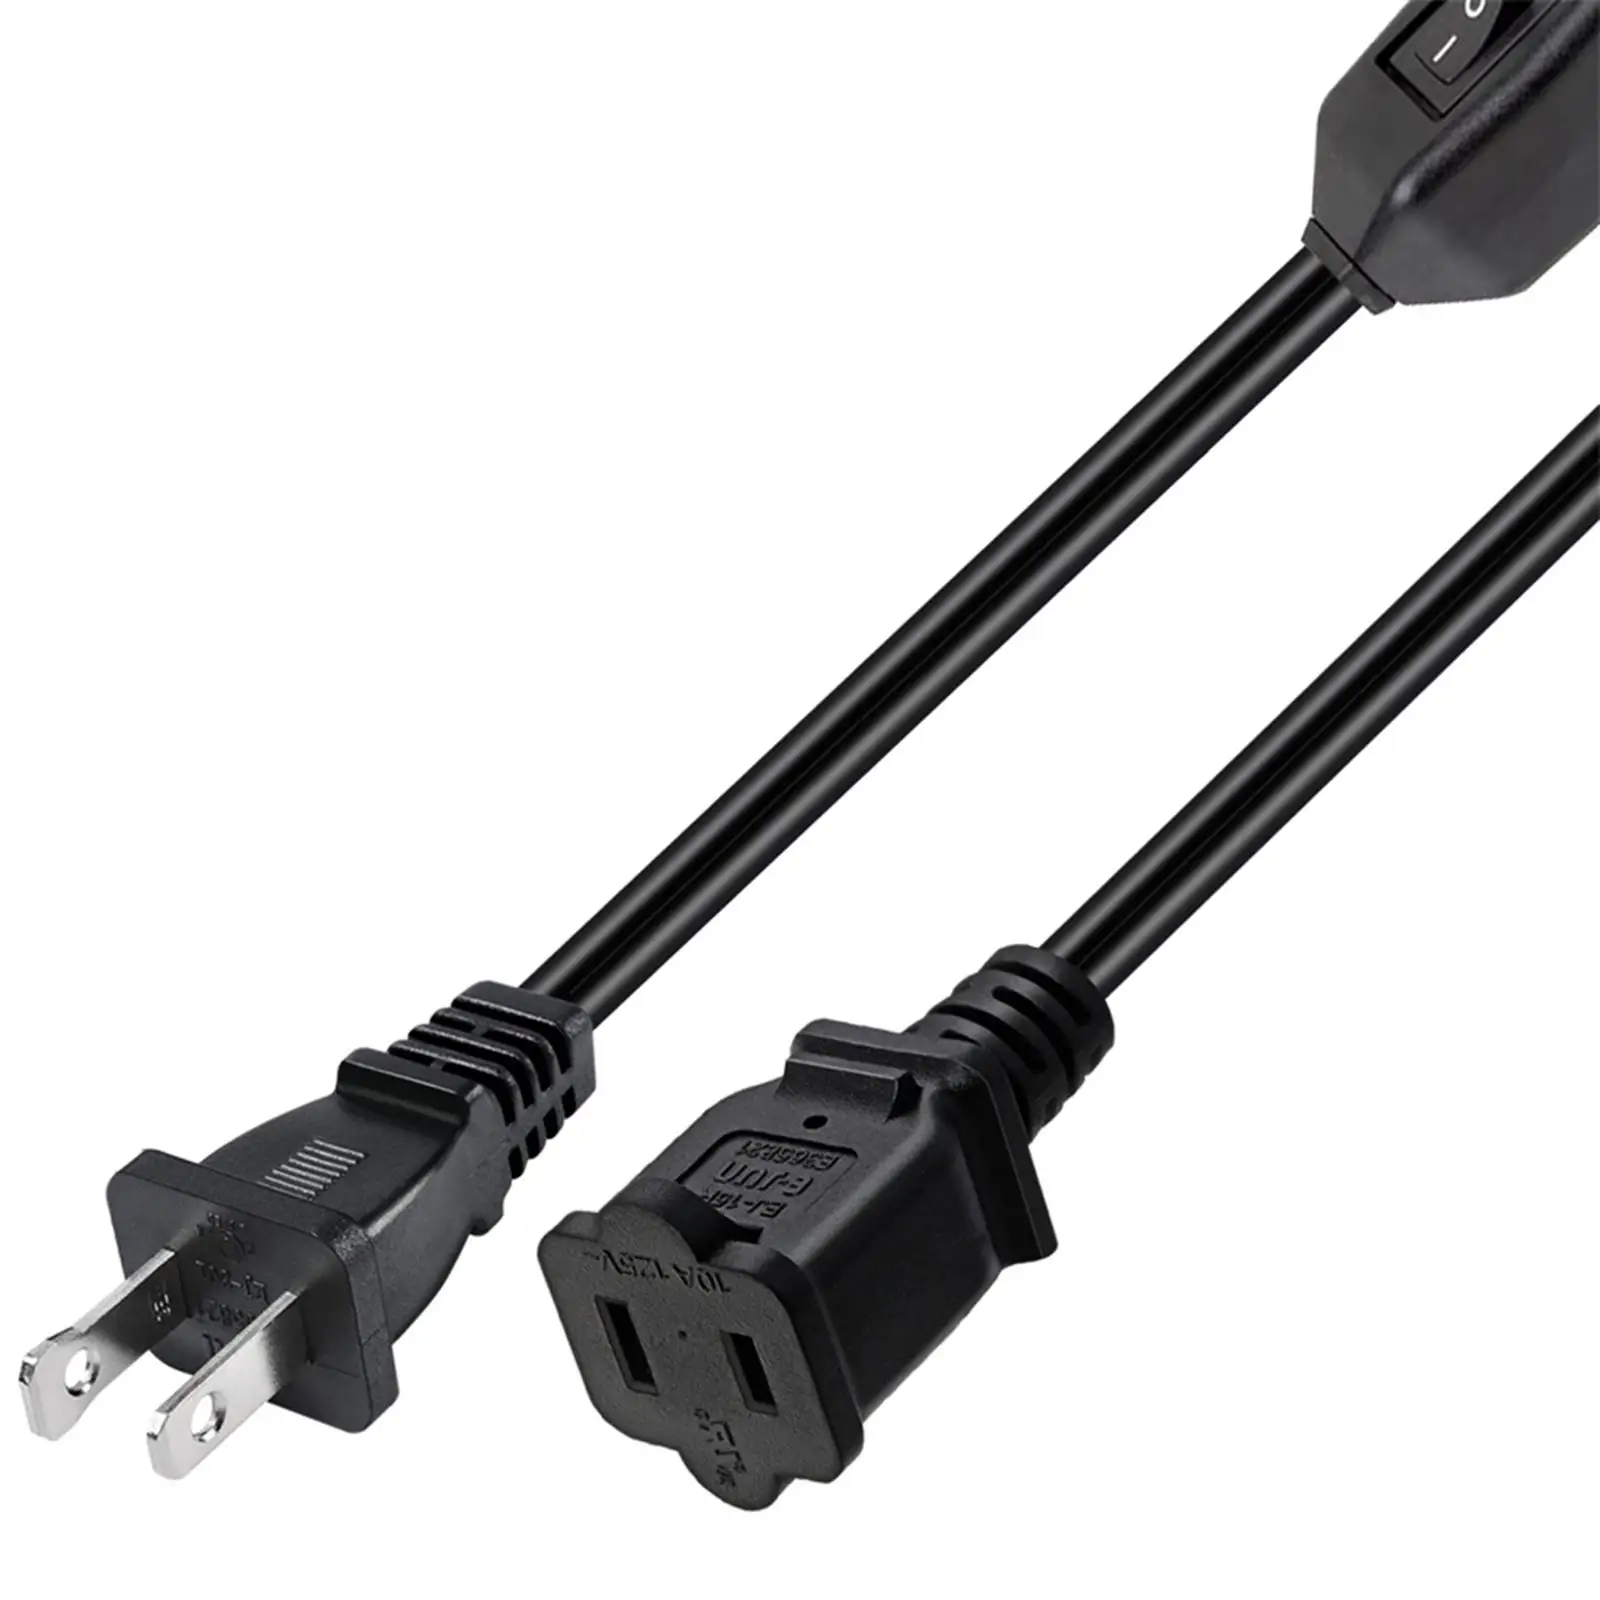 32cm Extension Cord, 2 Prong ,US, 13A 125V on/ off, Durable, Power Supply Cord, for Fan Lamp